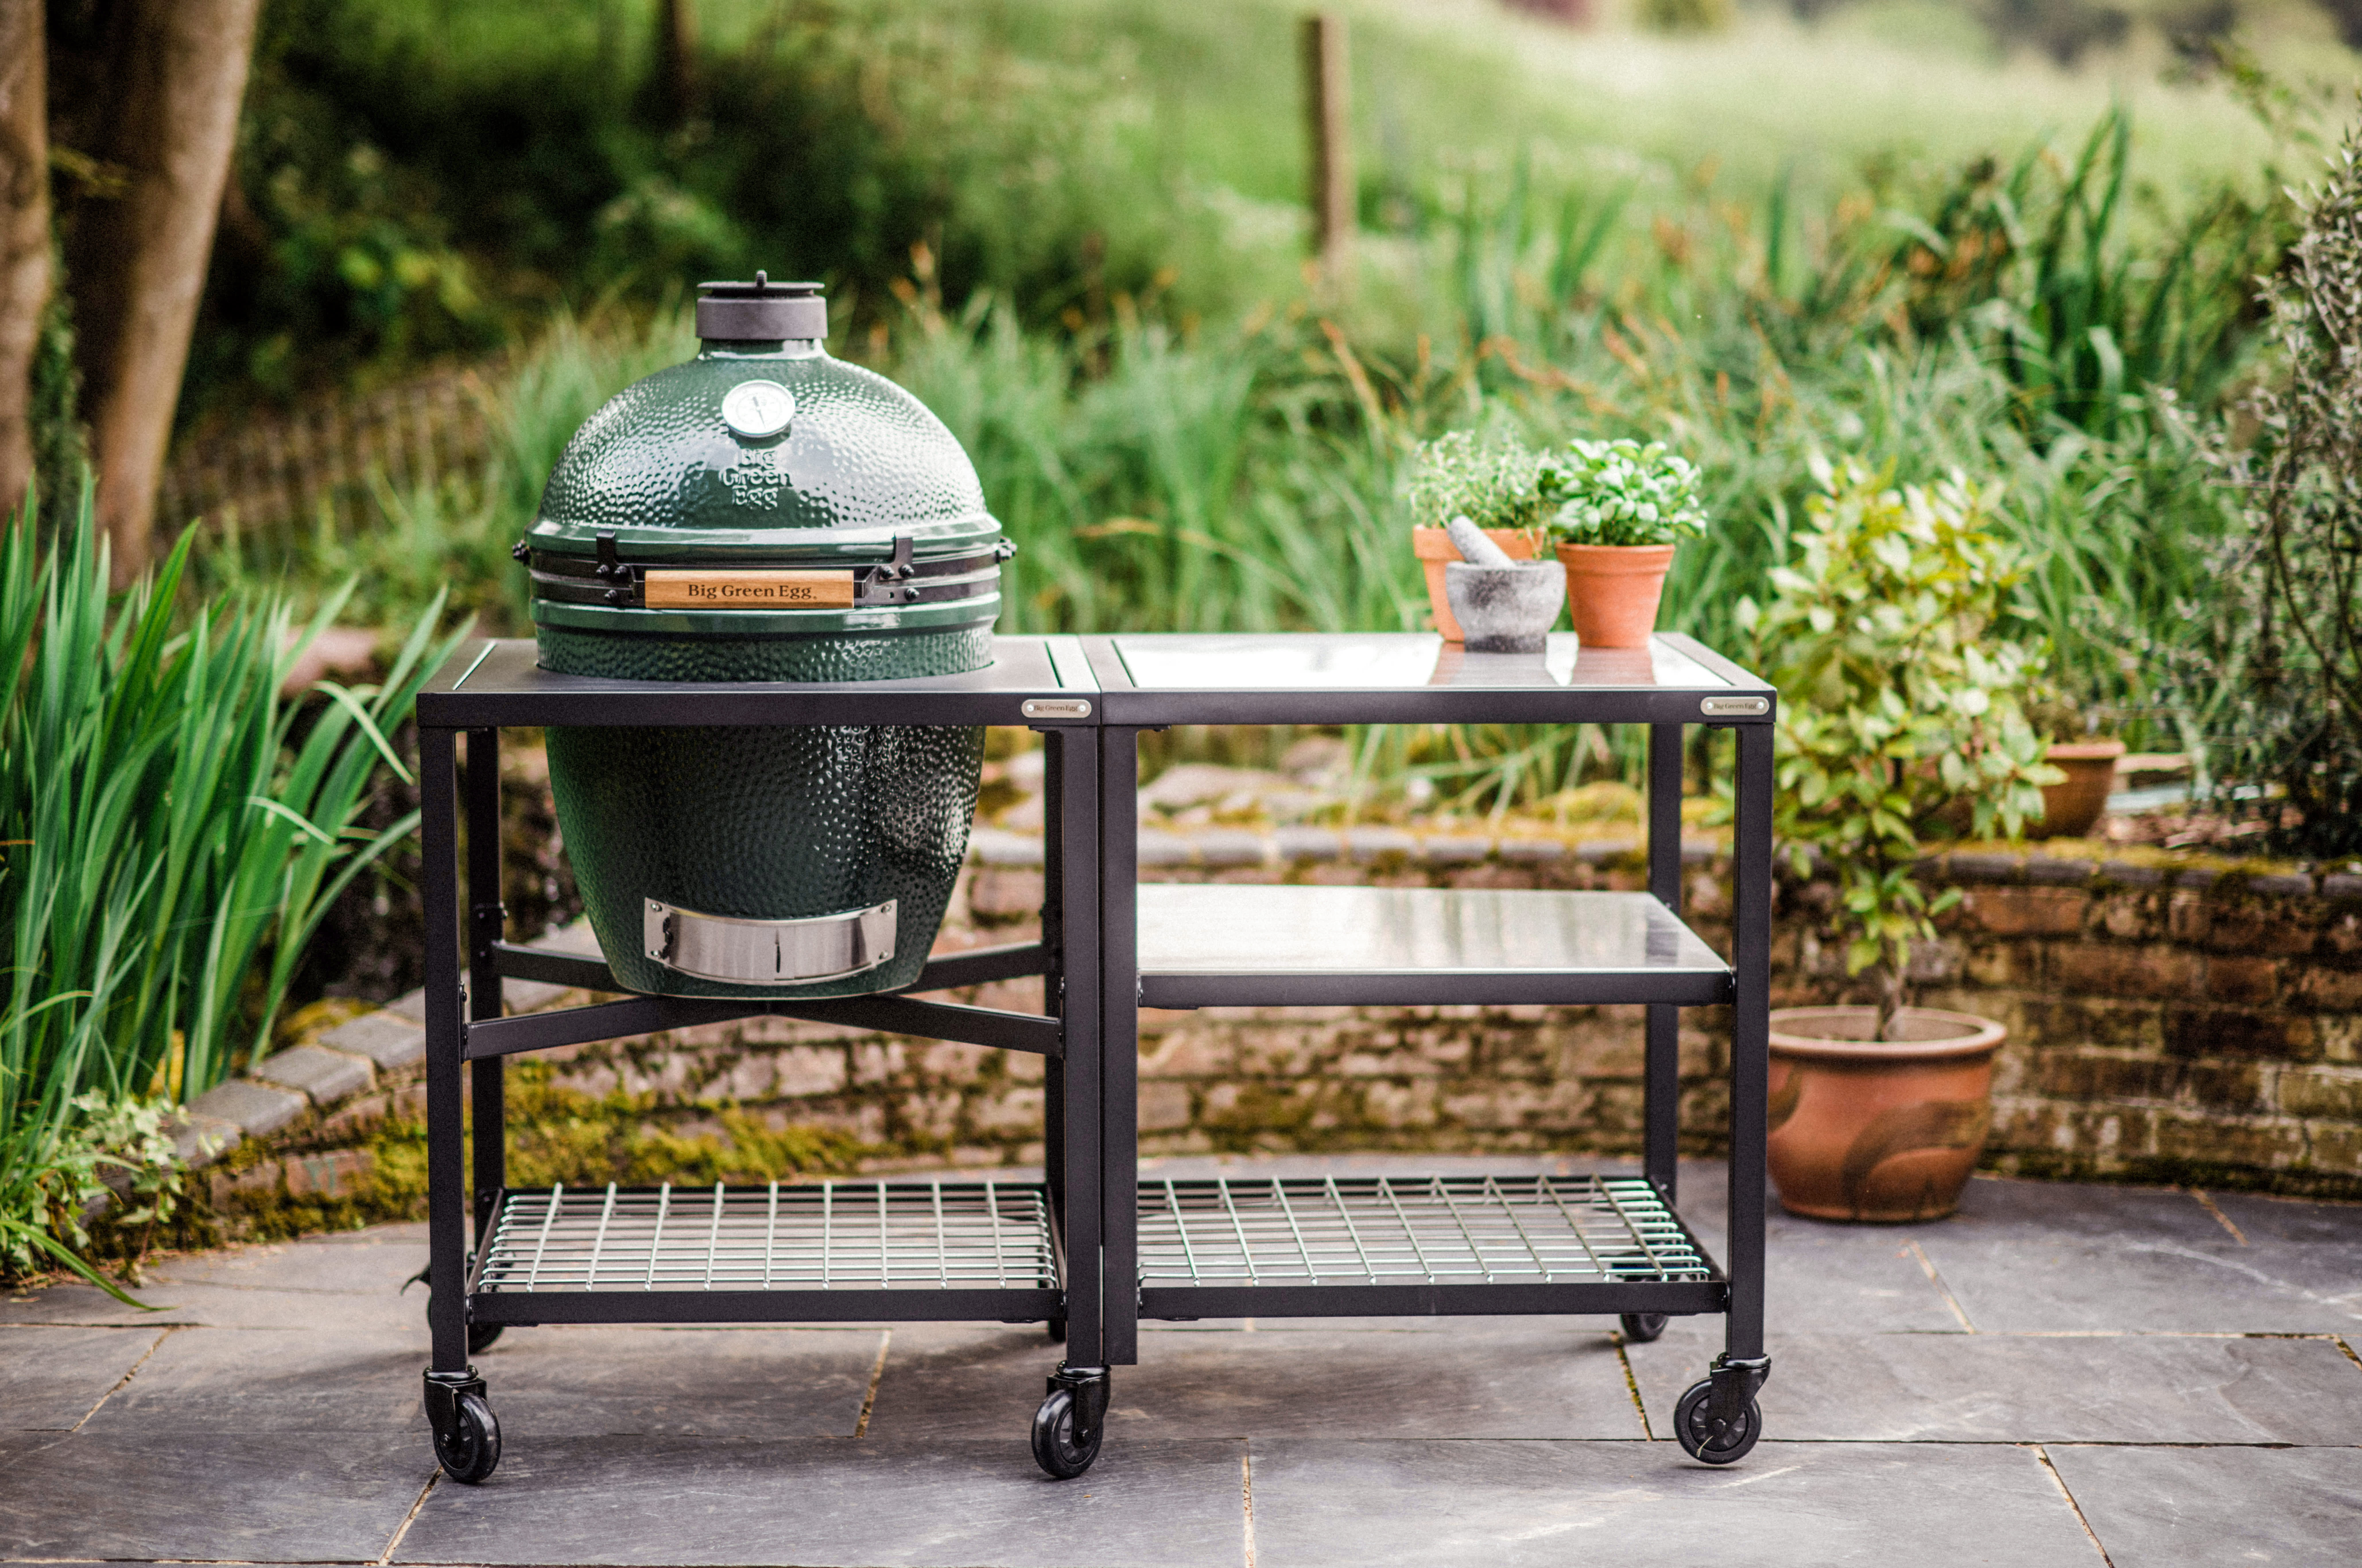 What's a Big Green Egg and Is Worth the Money? | The Kitchn